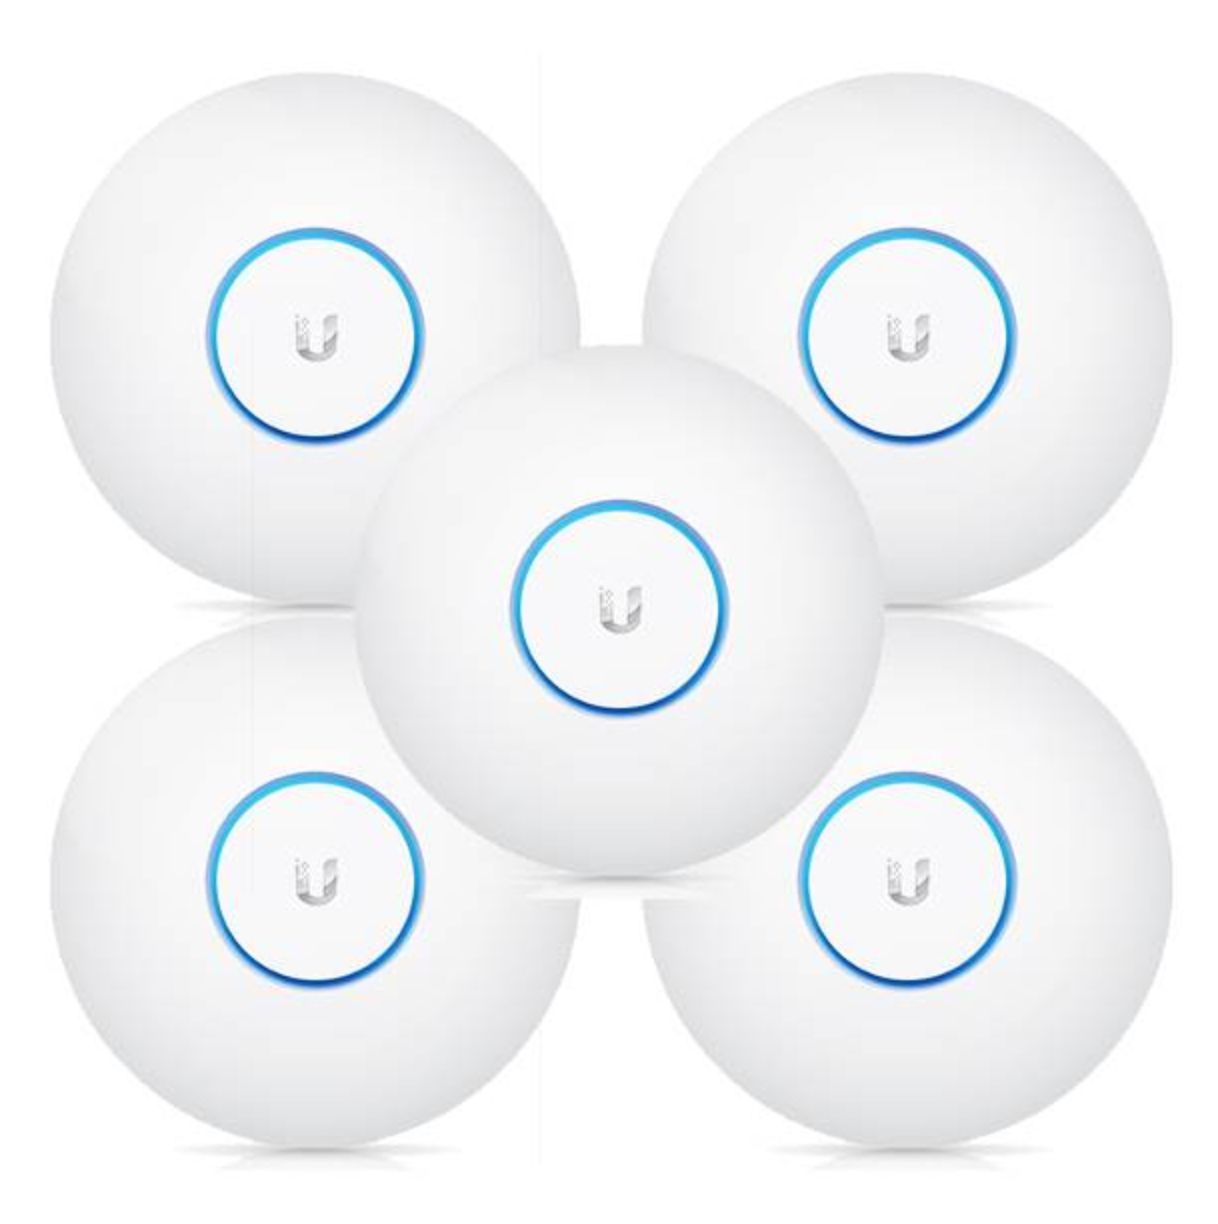 UBIQUITI UAP-AC-PRO-5 2.4GHz/5GHz 802.11ac No PoE adapters in Set - 5 Pack_2